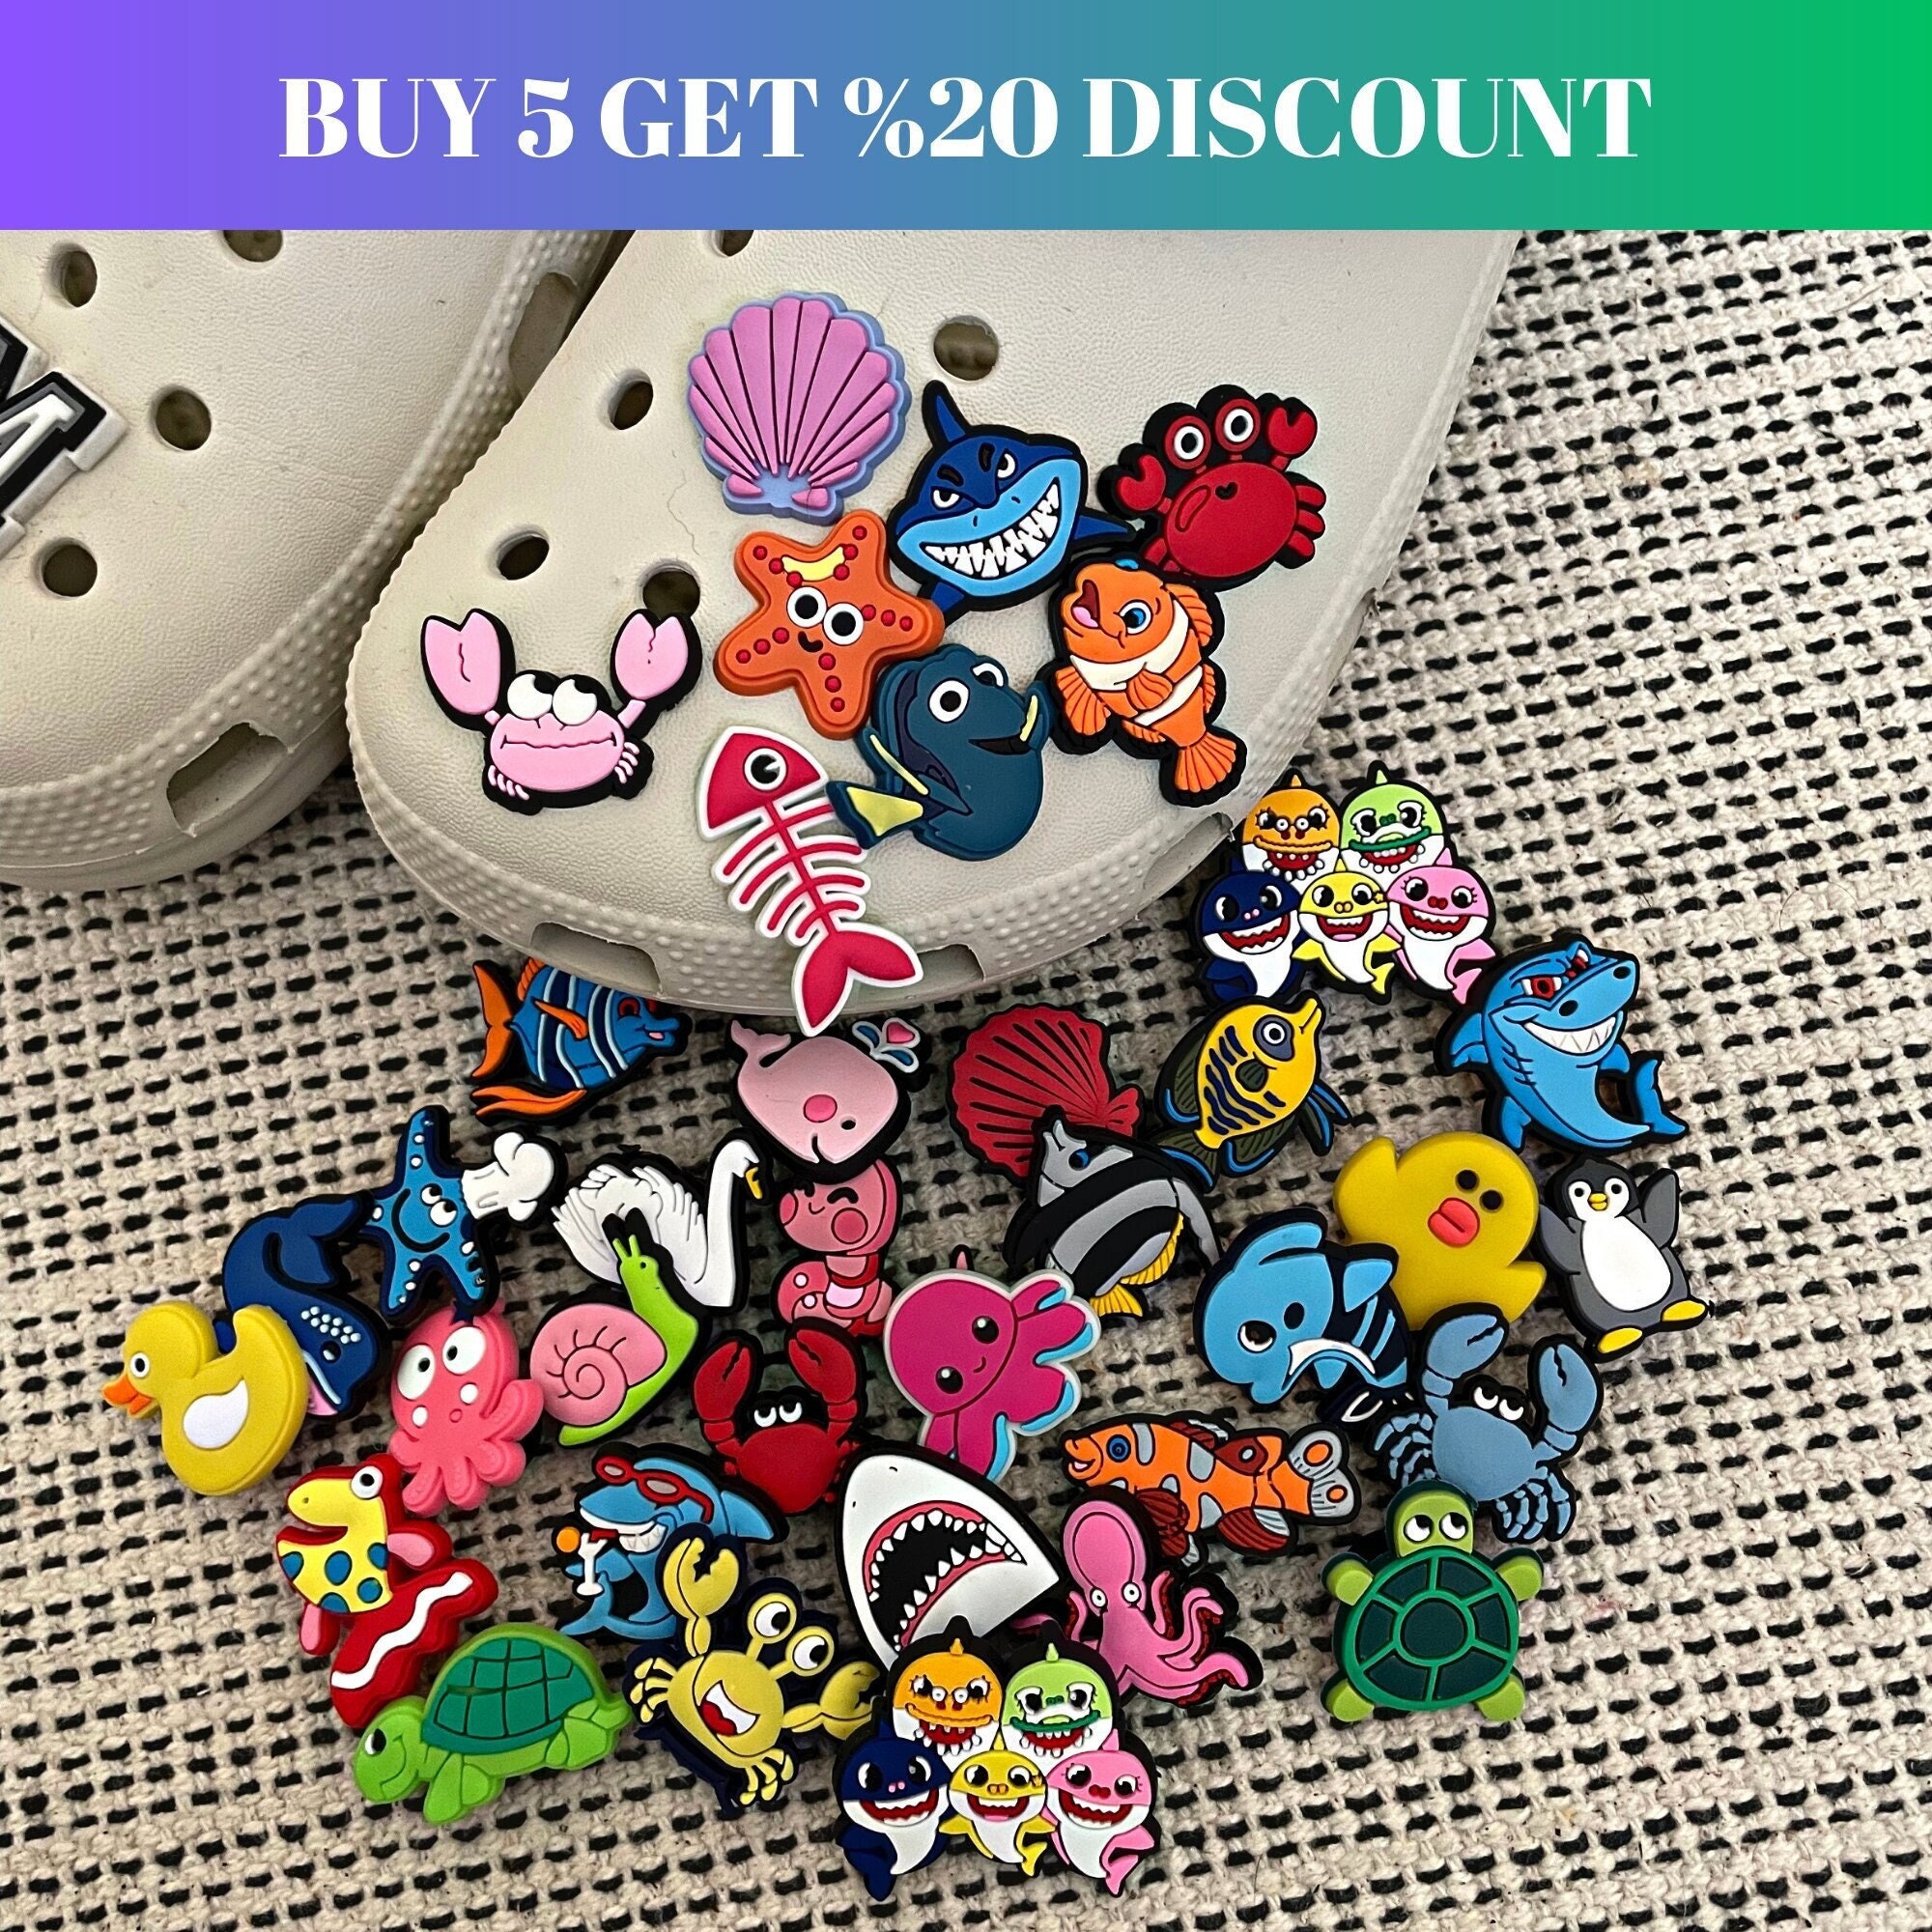 1-22Pcs PVC Croc Jibz Charms Projector Notes Game Popcorn Drink Chair Horn  Lost Garden Shoes Slipper Accessories Decorations